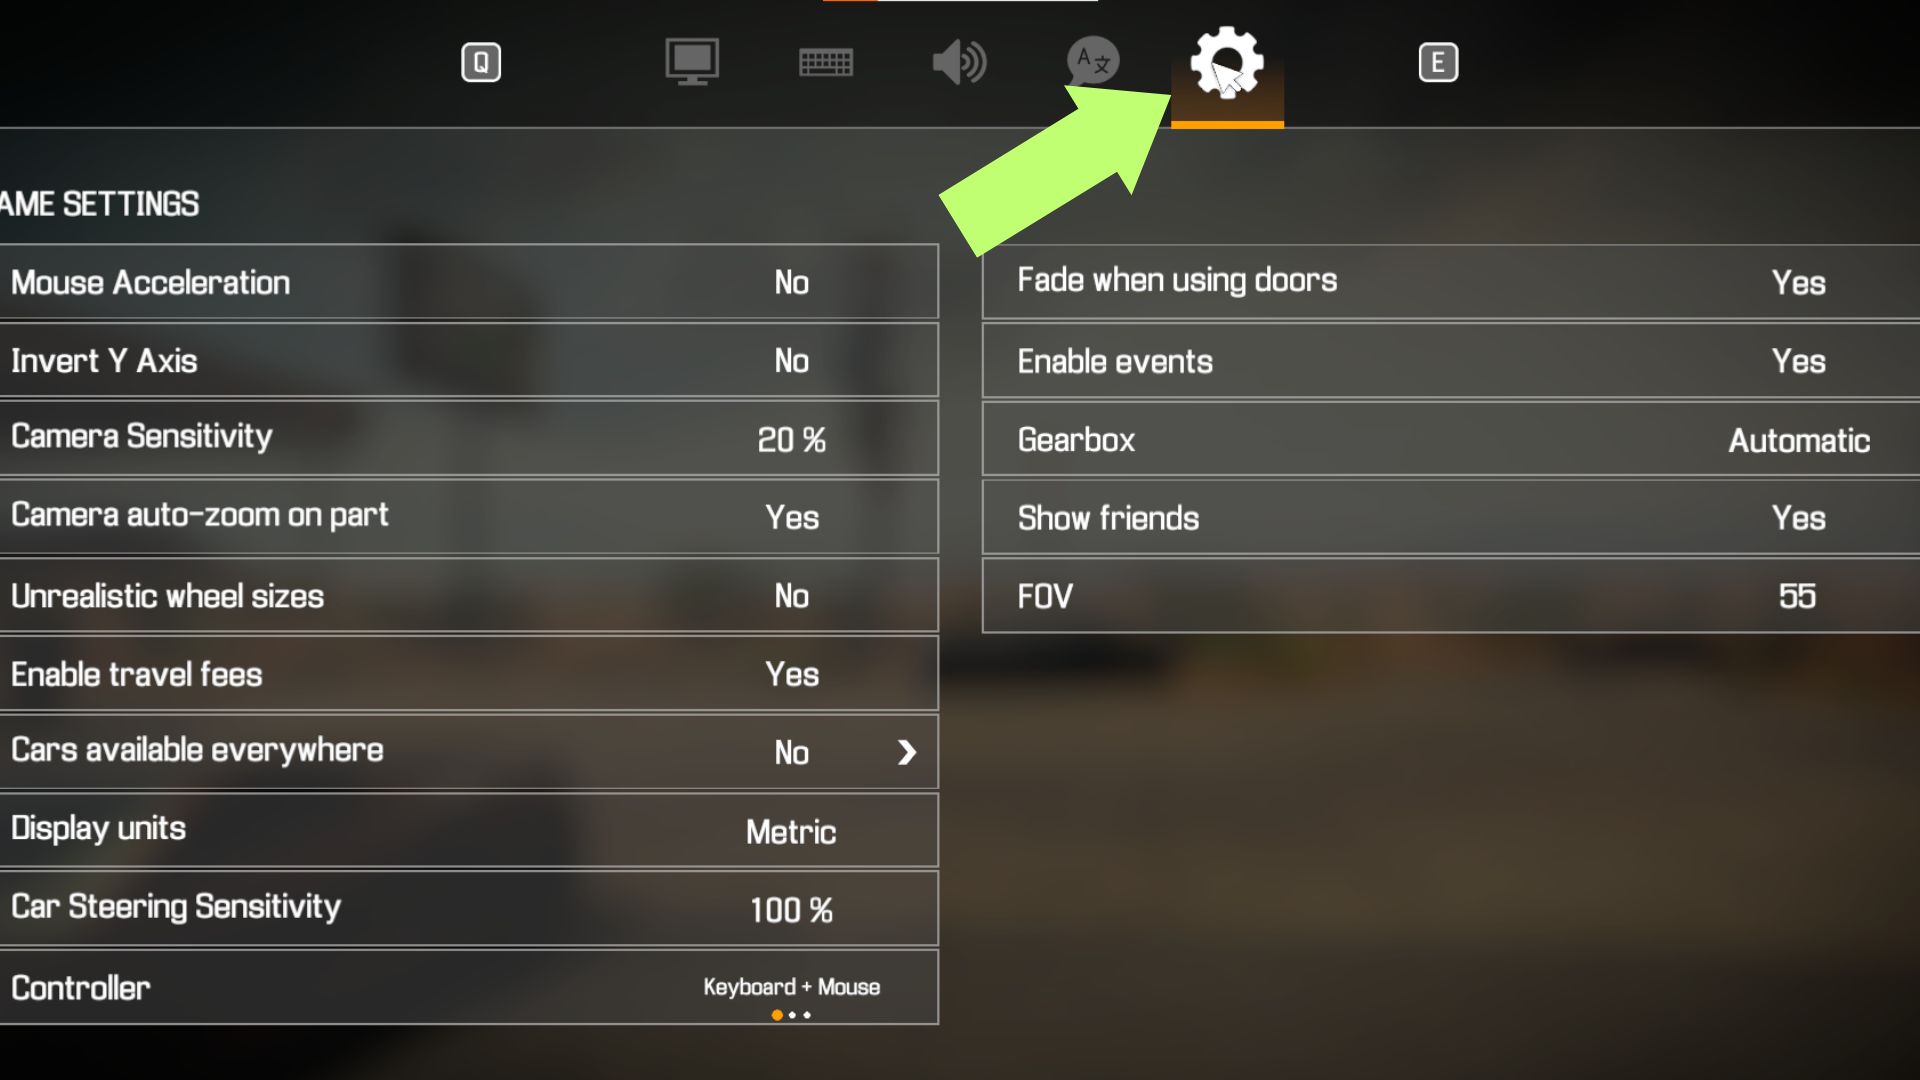 A screenshot showing which settings tab to navigate to enable cars everywhere